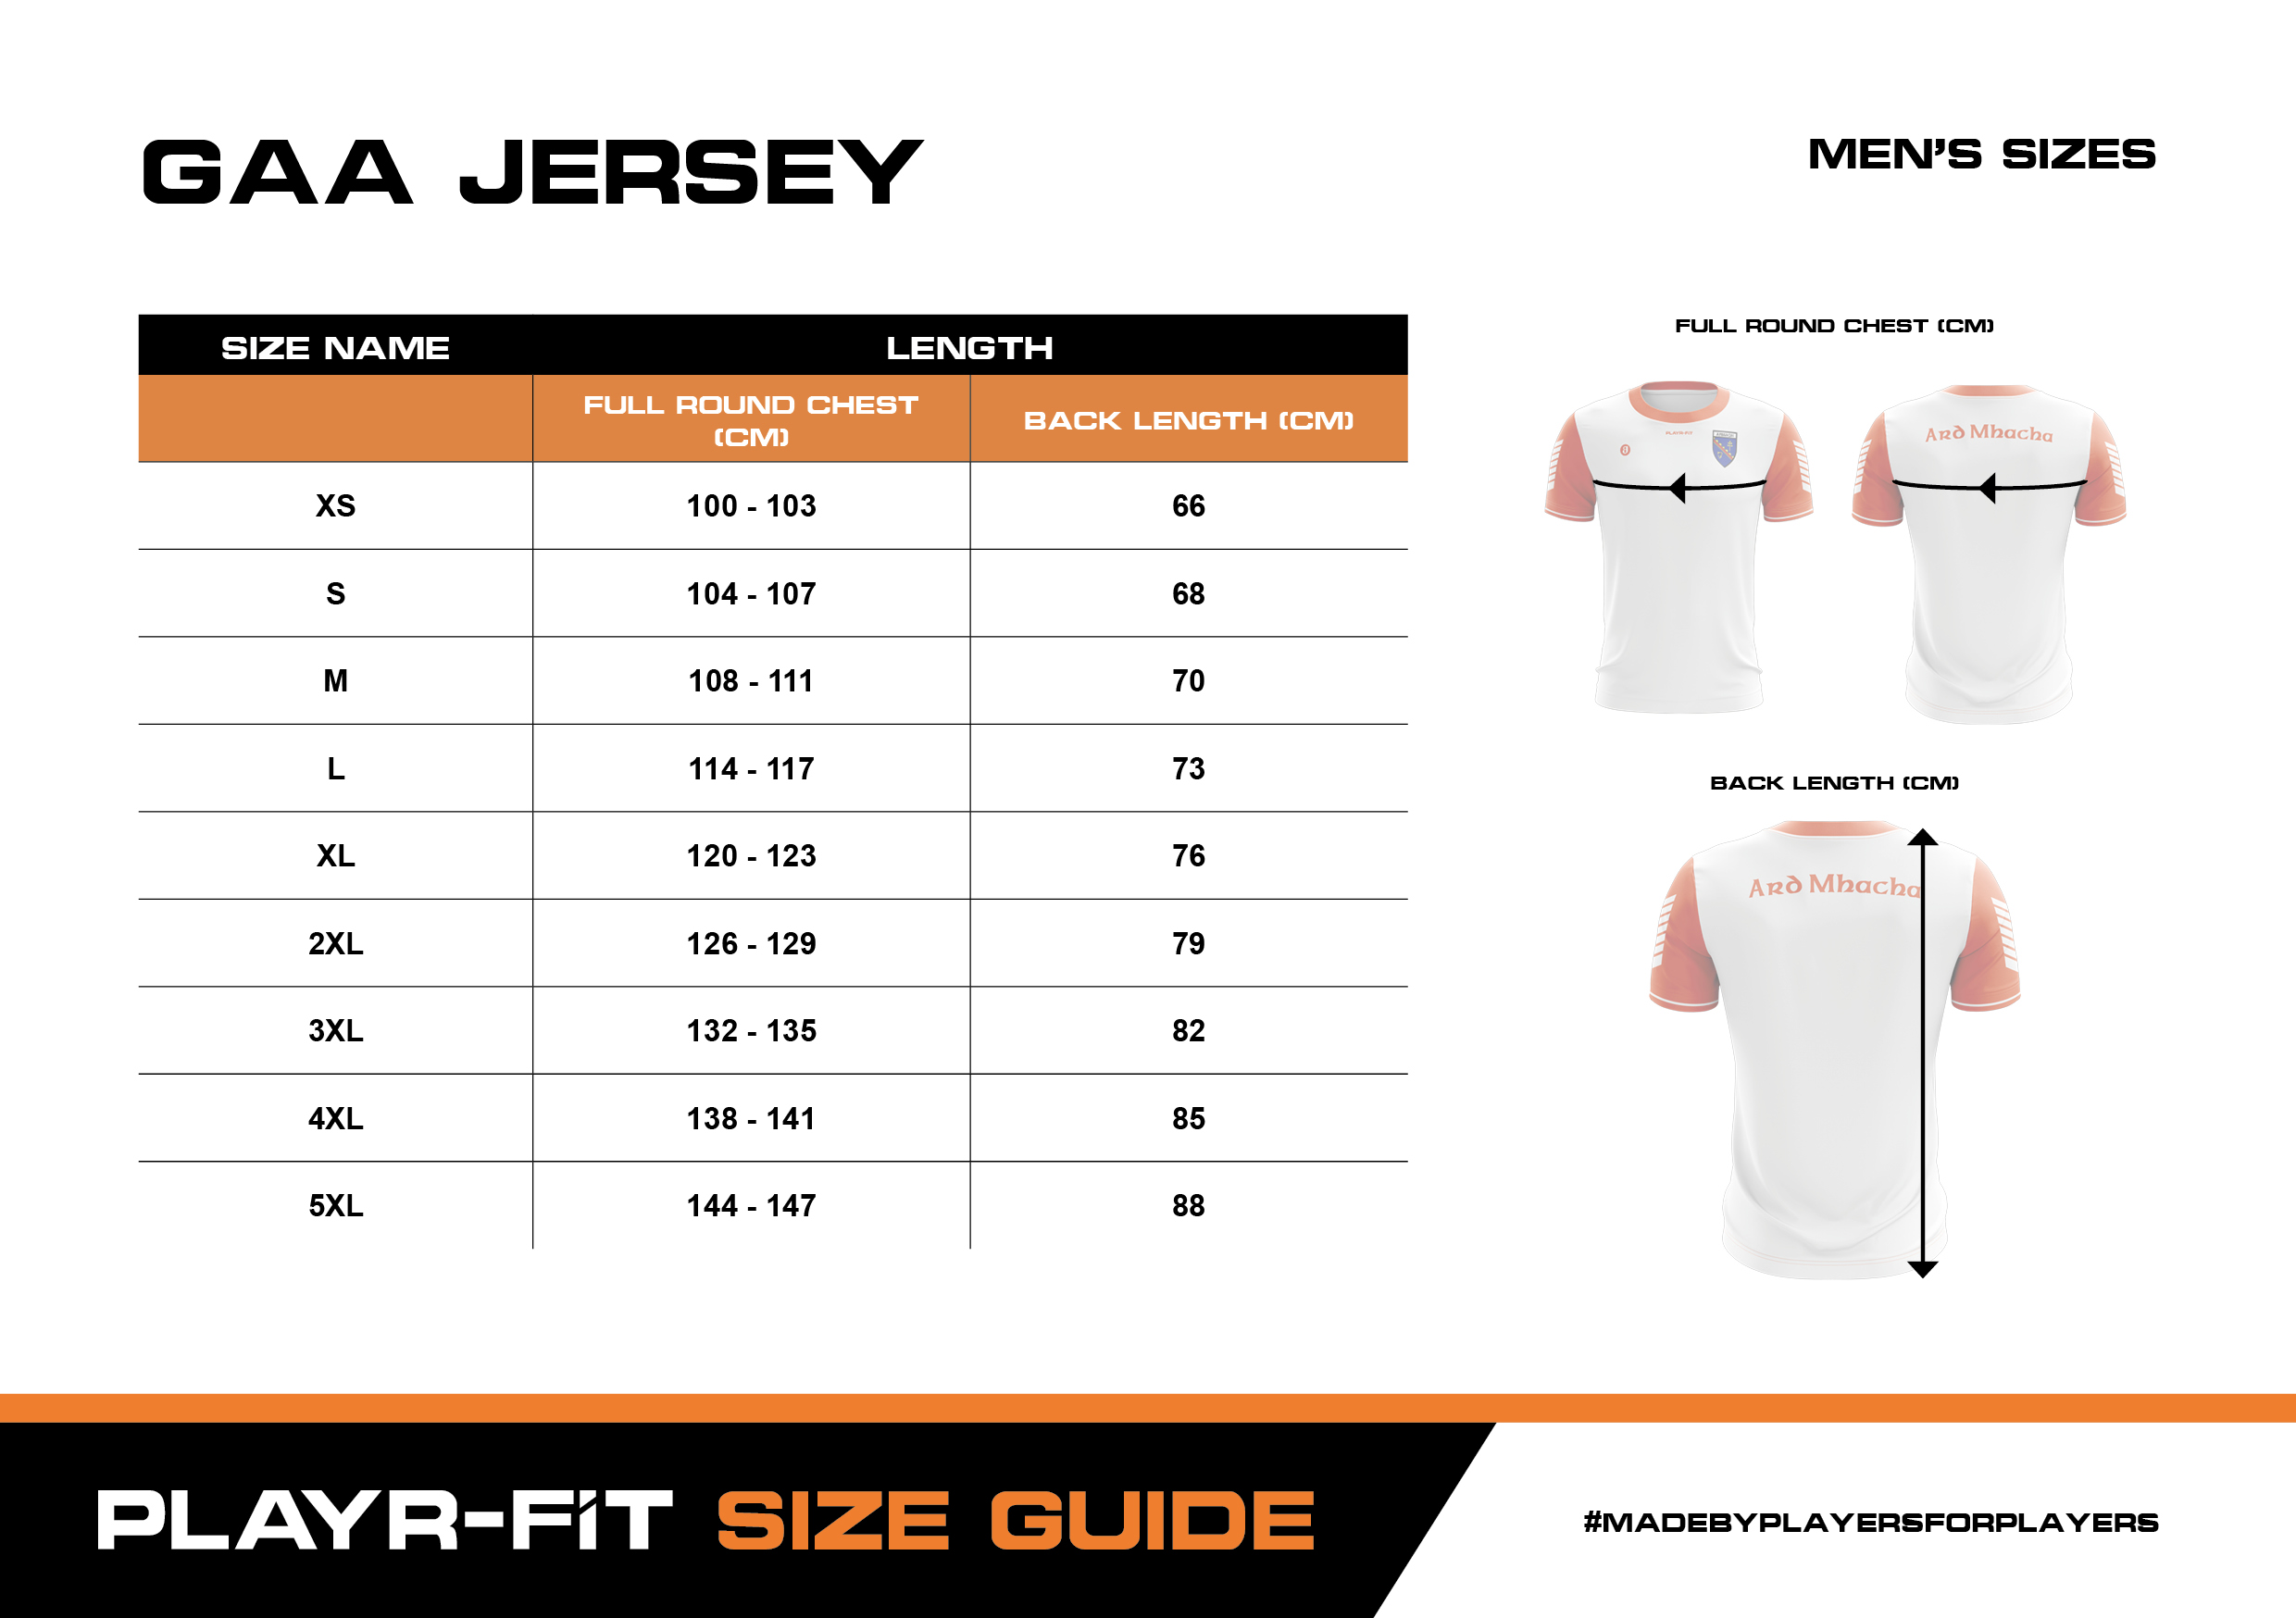 Download Size Guides - PLAYR-FIT